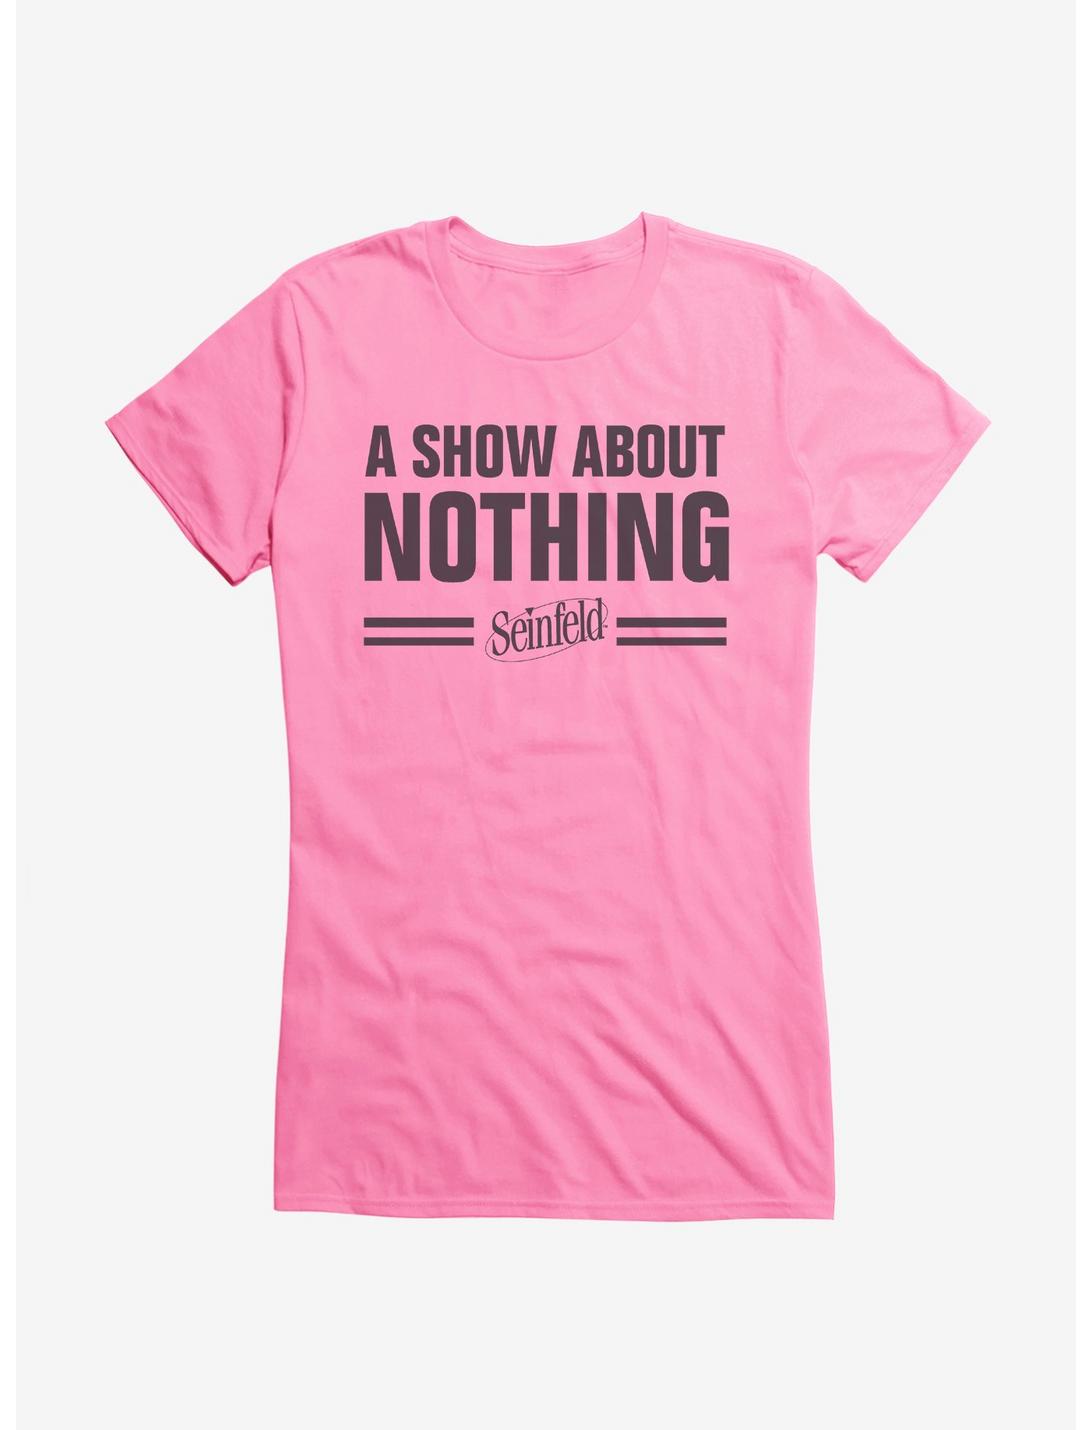 Seinfeld A Show About Nothing Girls T-Shirt | Hot Topic